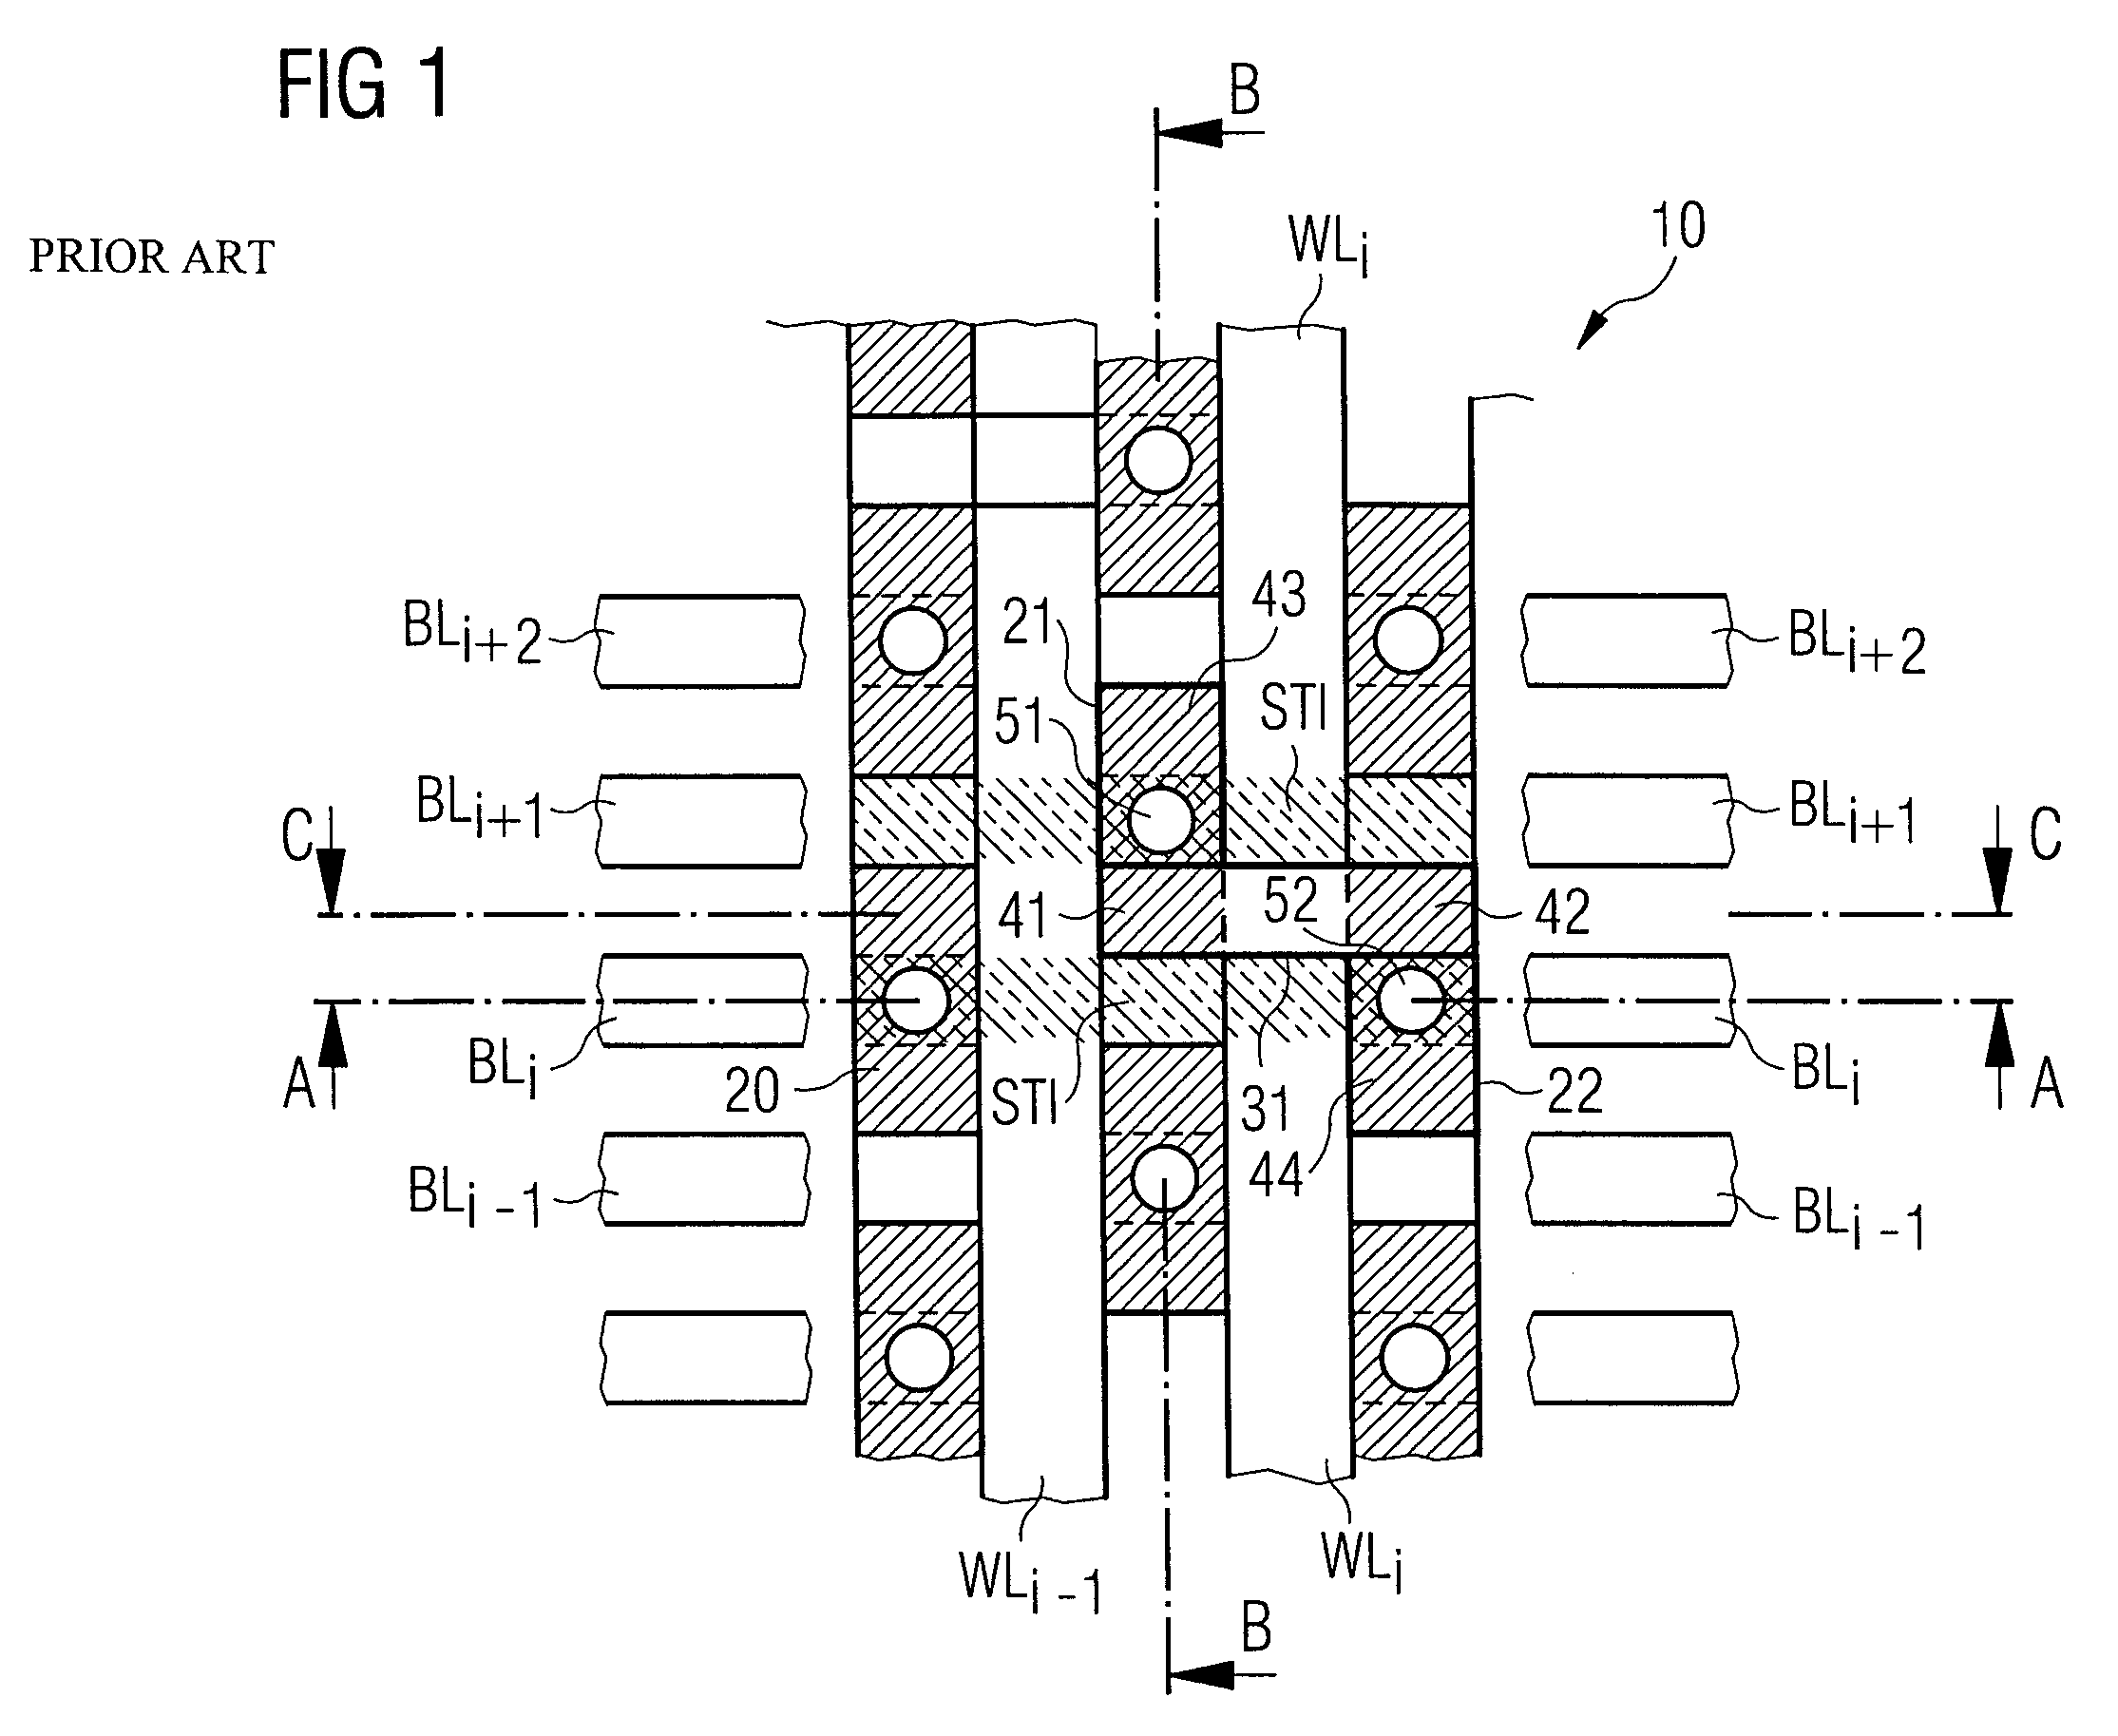 Method of forming a contact in a flash memory device